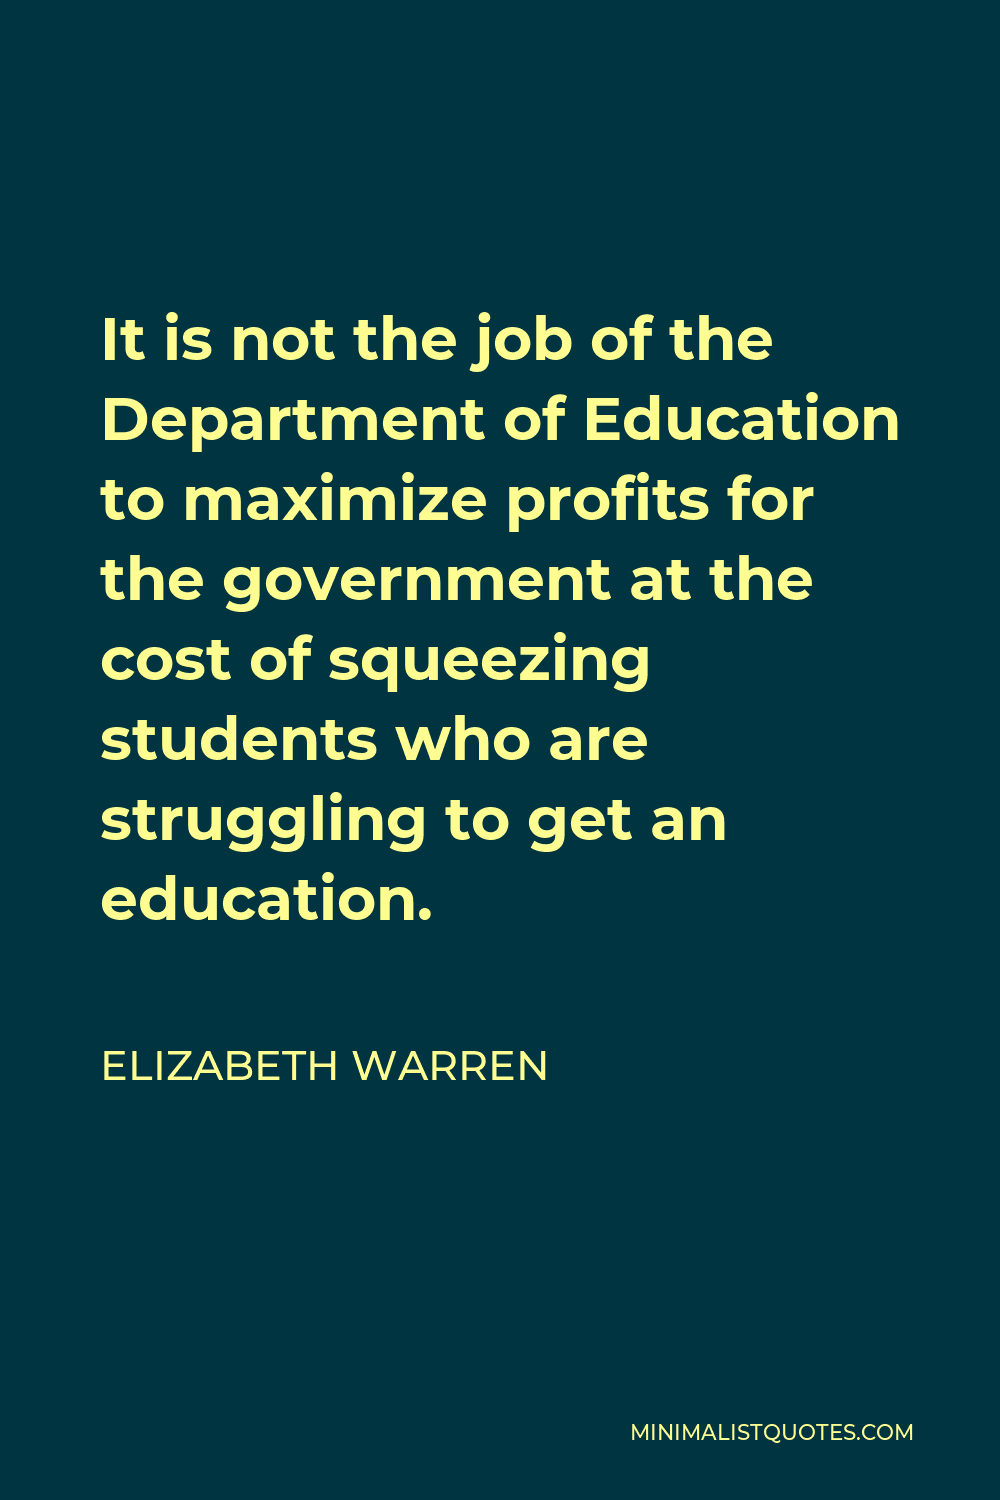 Elizabeth Warren Quote - It is not the job of the Department of Education to maximize profits for the government at the cost of squeezing students who are struggling to get an education.